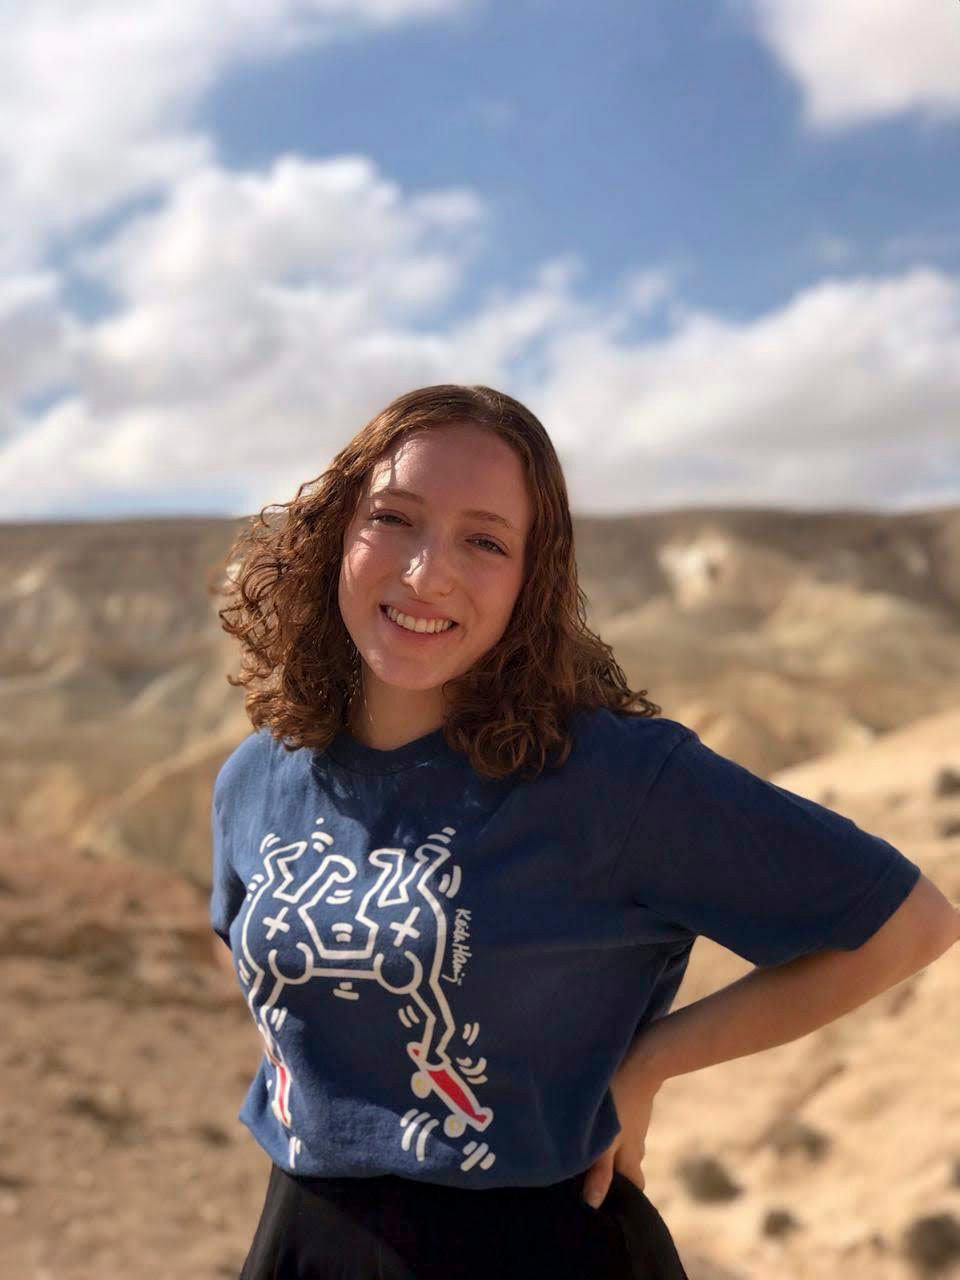 2019 HAFTR graduate Miriam Kopyto spent time in Rehovot, Israel over the summer with 55 other teenagers from across the world conducting laboratory research with professional scientists.